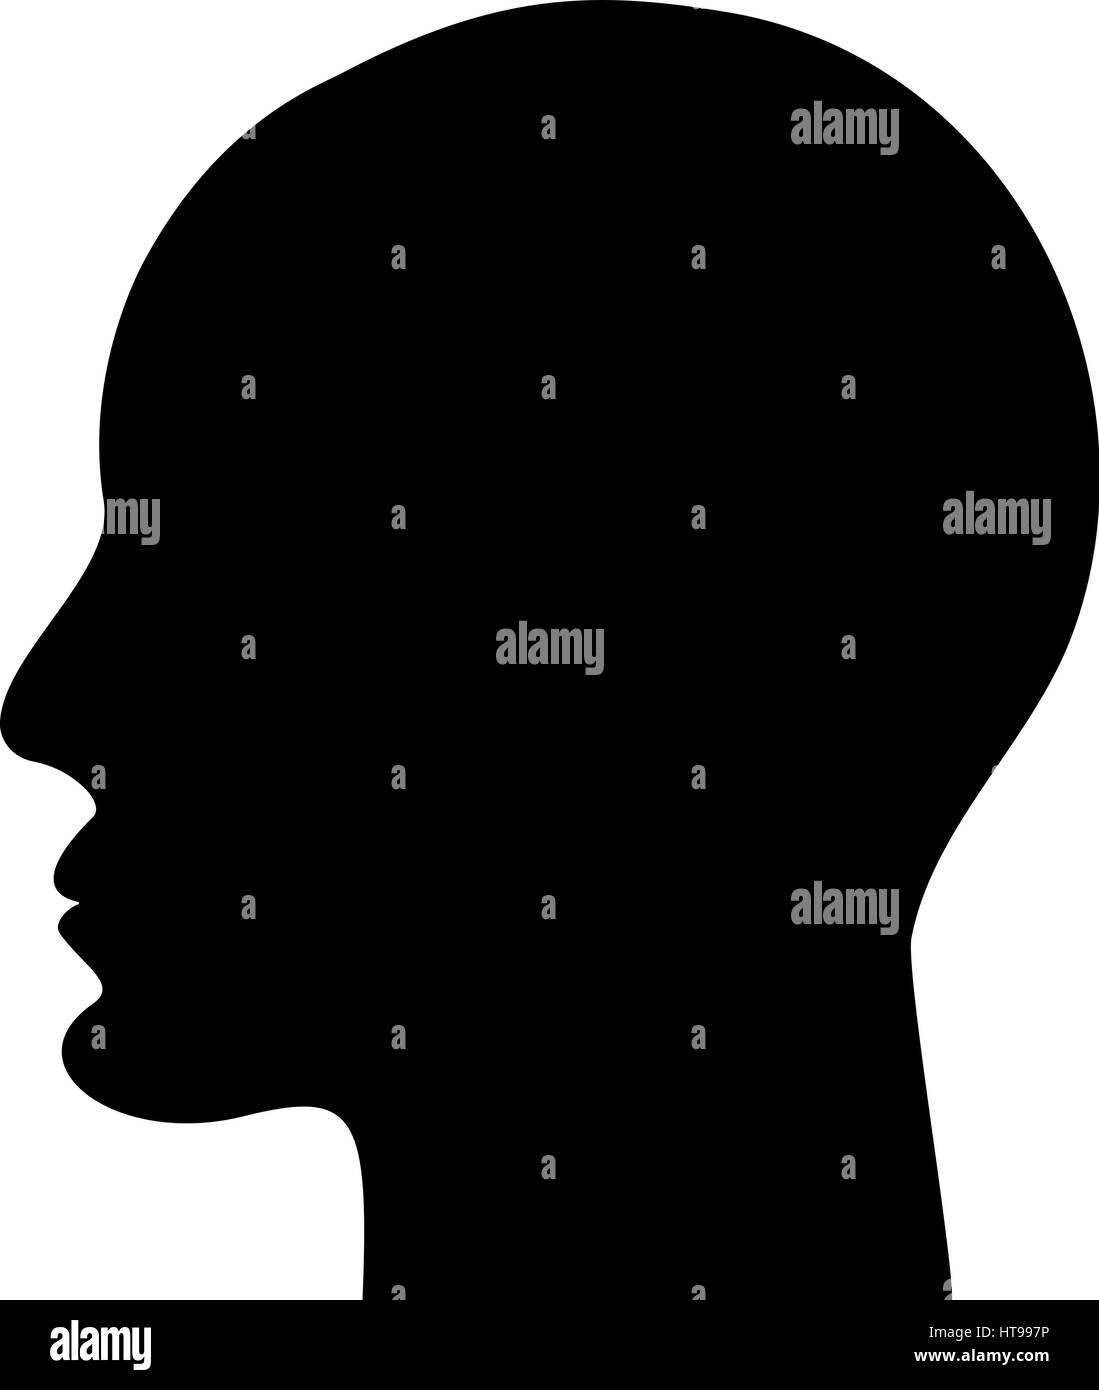 Human head or profile silhouette isolated on white background Stock Vector